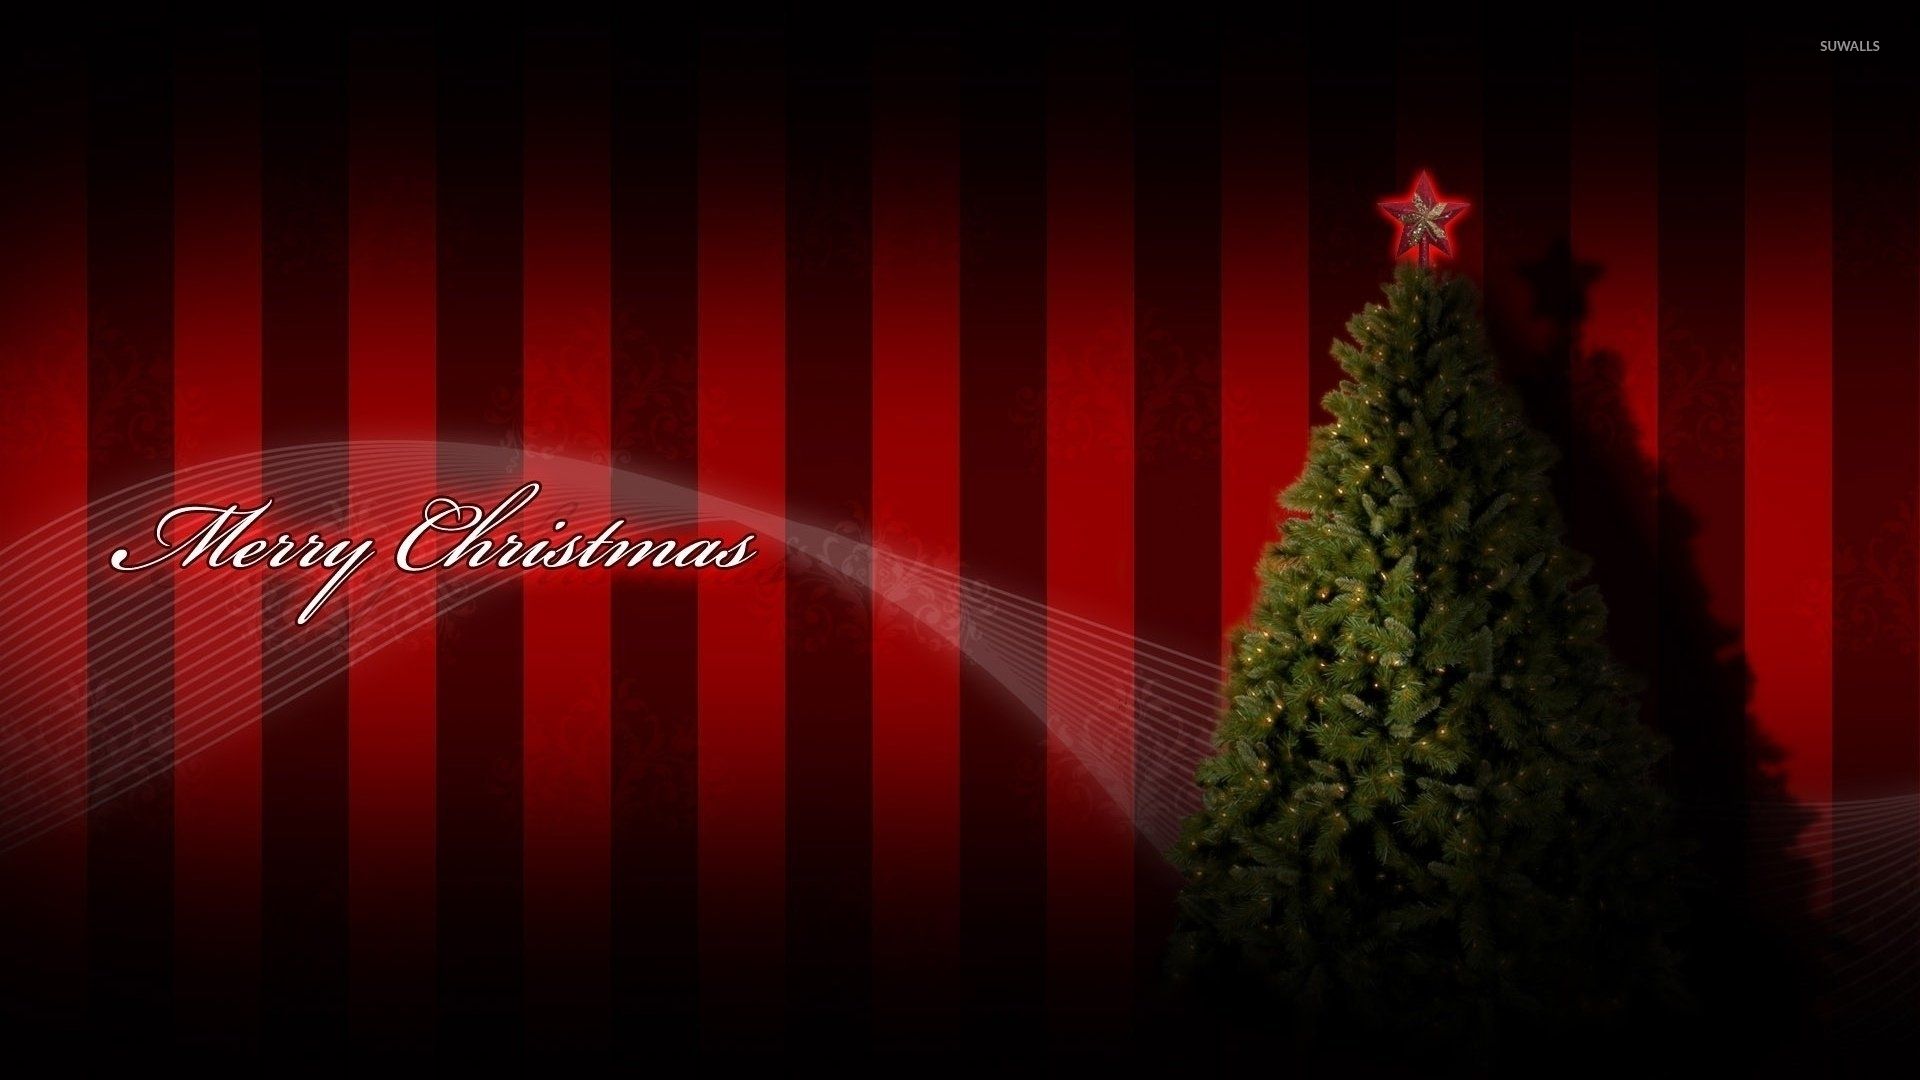 Red star on top of the Christmas tree wallpaper wallpaper